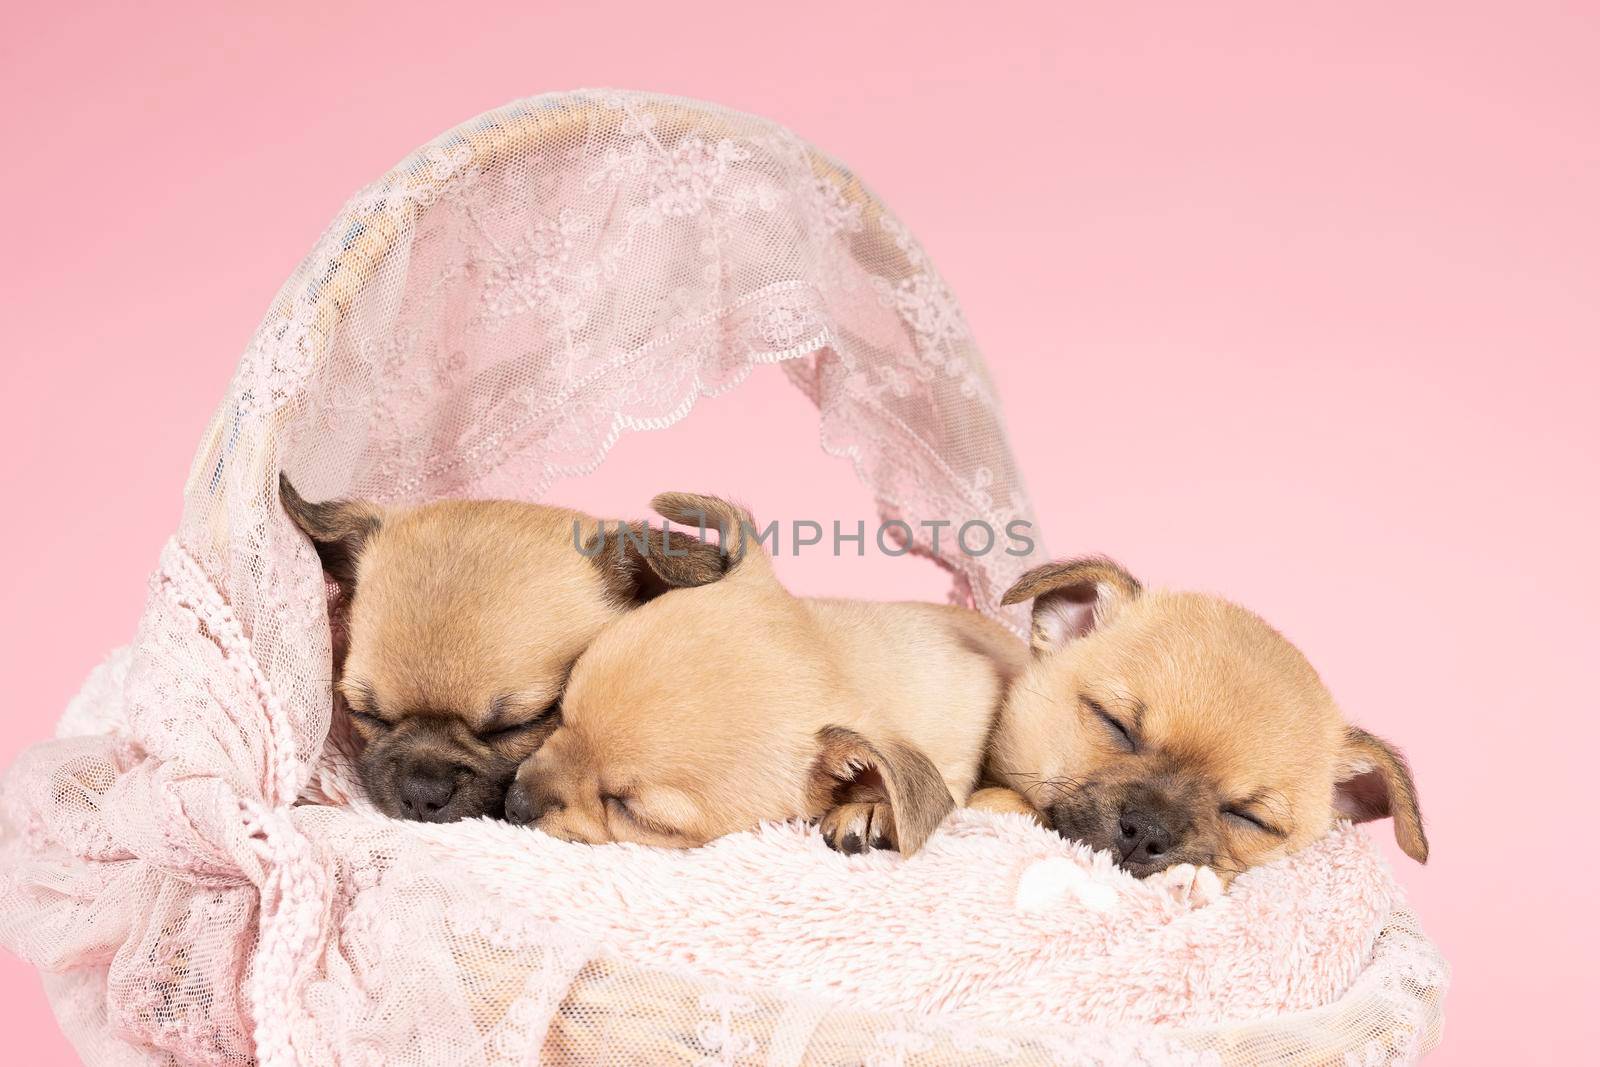 Three cute little Chihuahua puppies sleeping on a pink fur in a pink lace basket with pink background